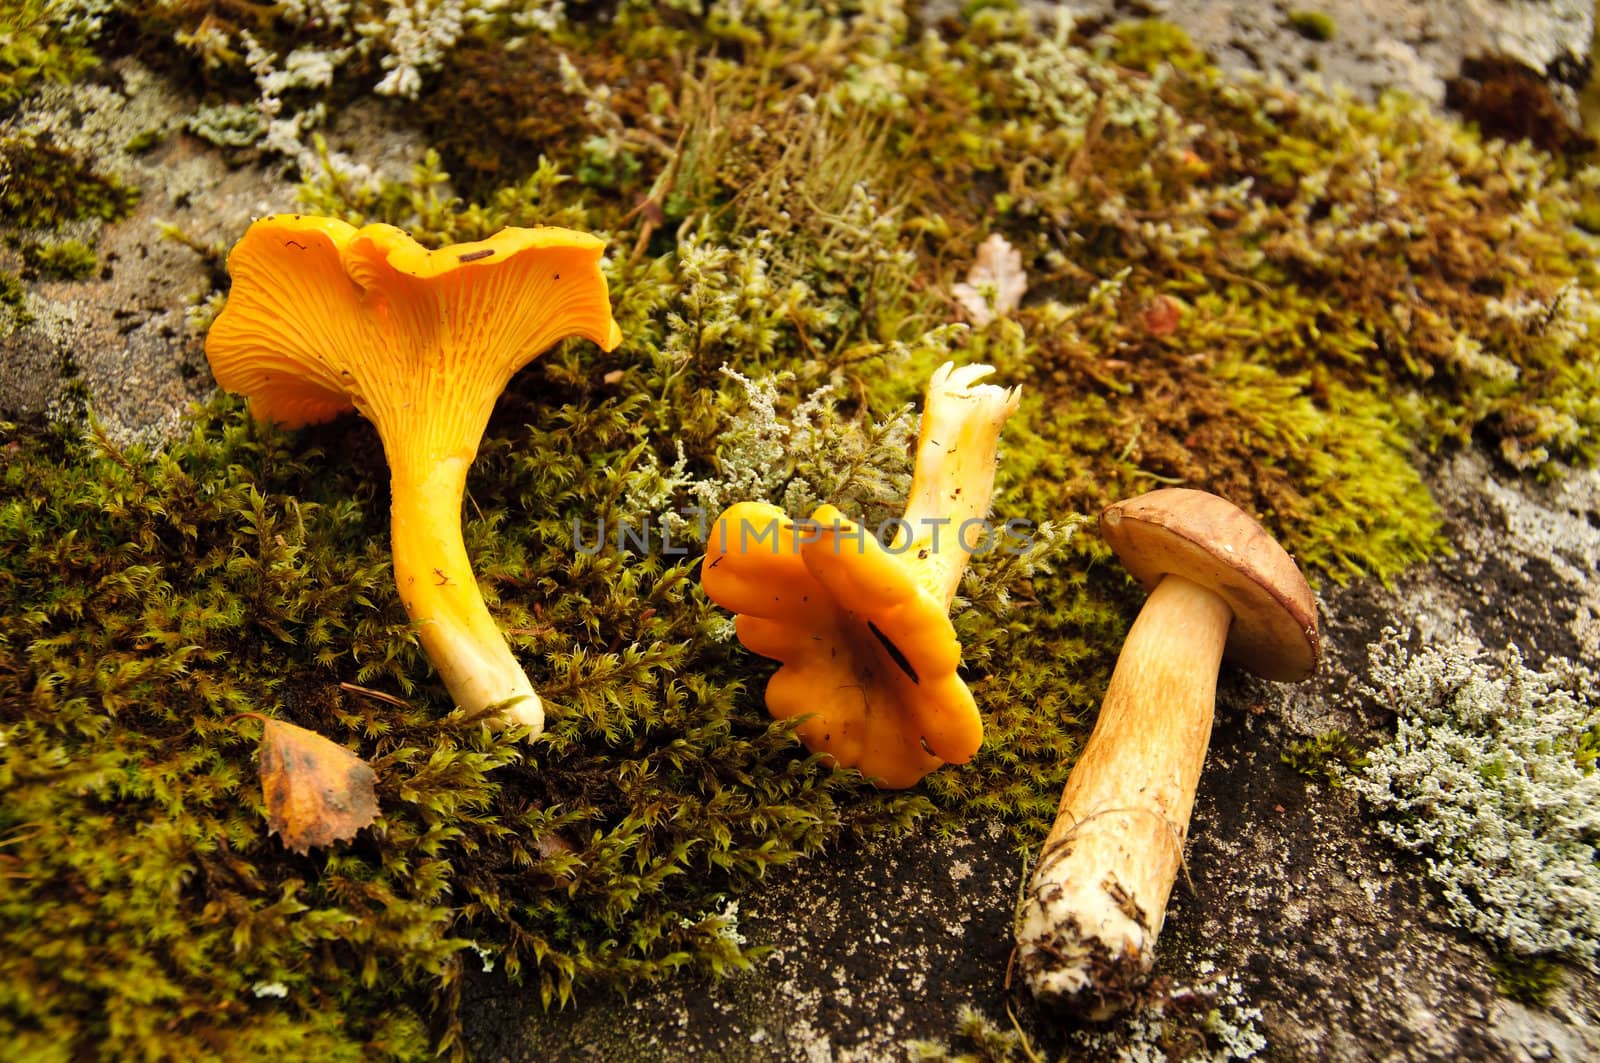 Fresh mushrooms from the forest, chanterelles and boletus